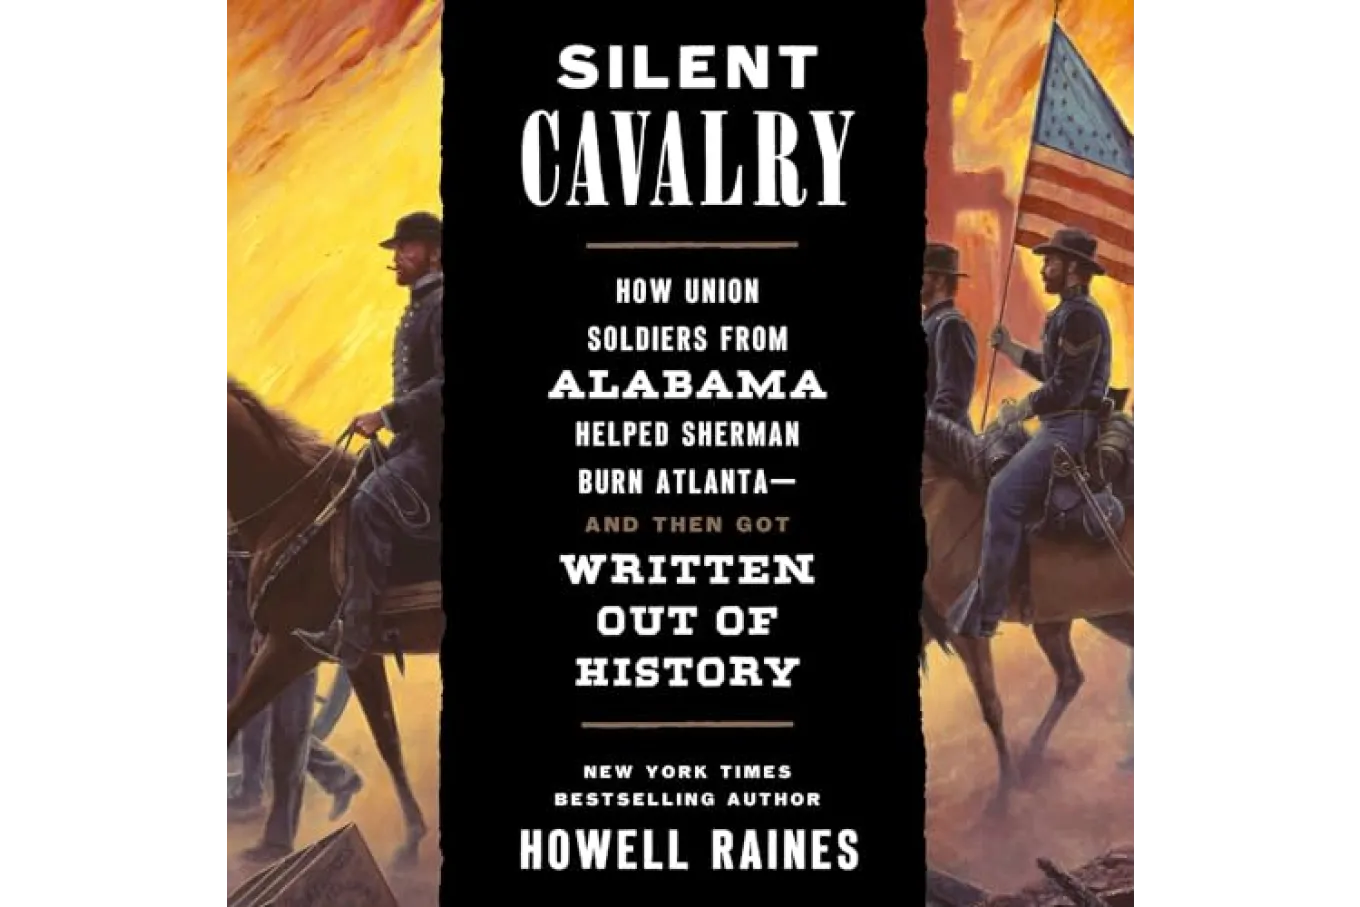 In the background Union soldiers dressed in blue march on their horses while a fire blazes behnd them. The soldier on the very edge of the picture carries an American flag with 34 stars. In between the picture is a large rectangle of black, the edges frayed to resemble a ripped picture. In that black rectangle is the title and author's name.